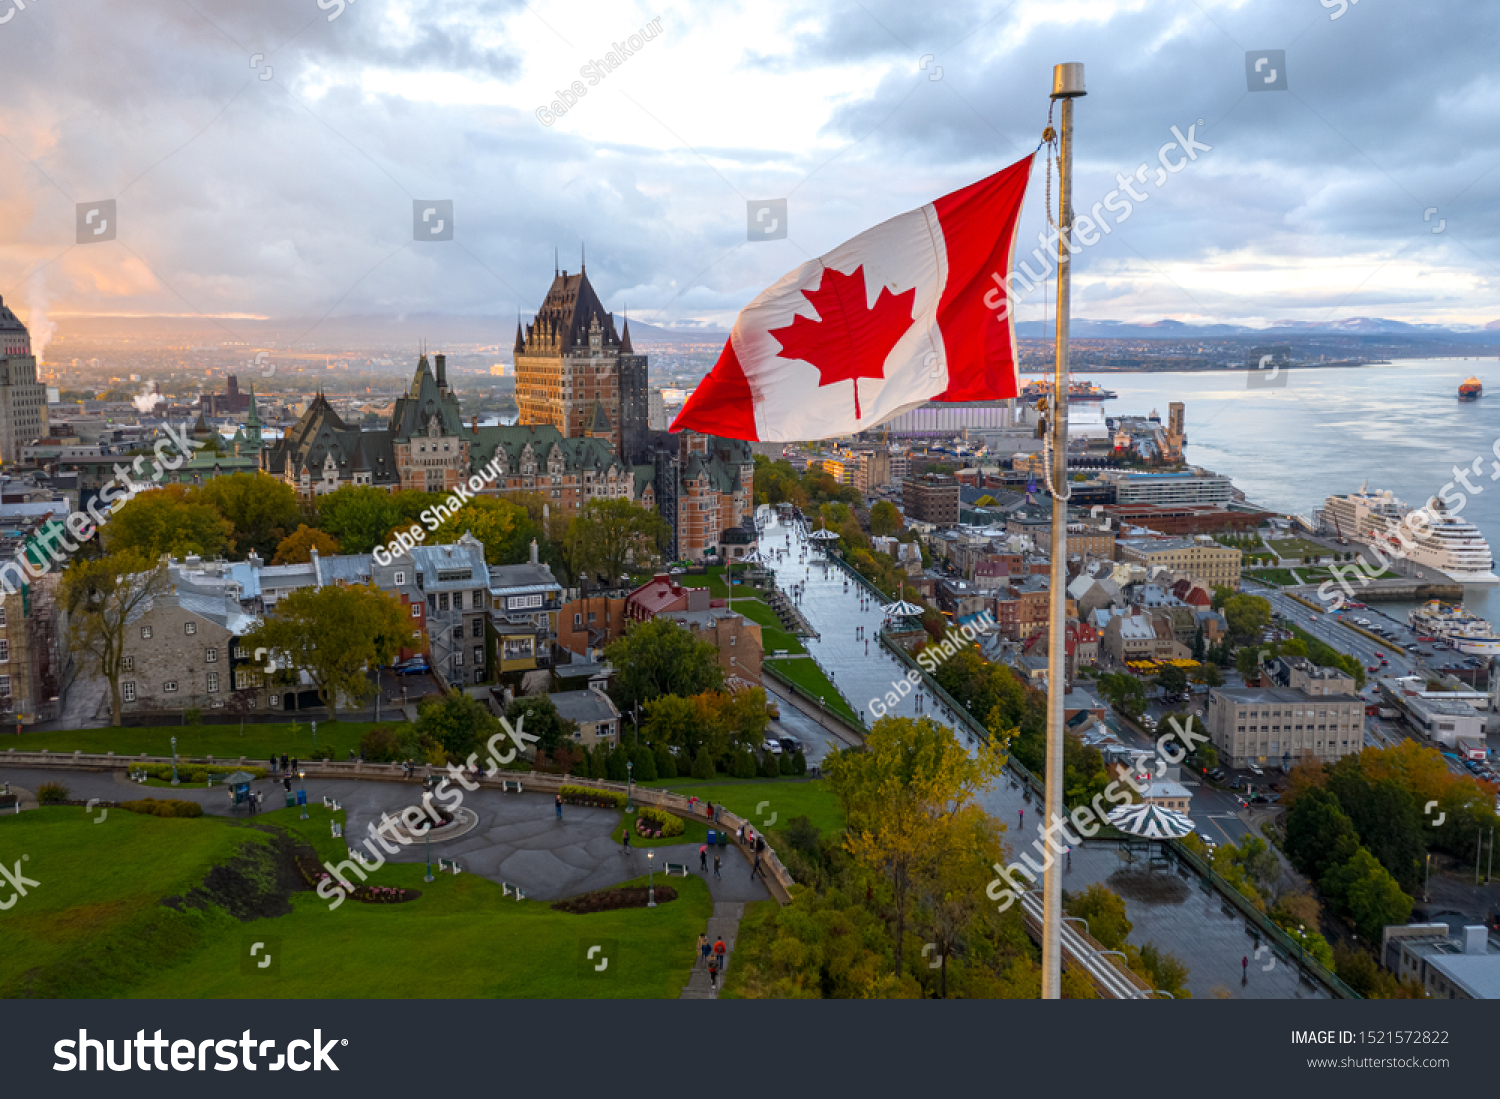 A Canadian flag flies high at sunset with Old Quebec City, Canada and the Saint Lawrence seaway in the background #1521572822